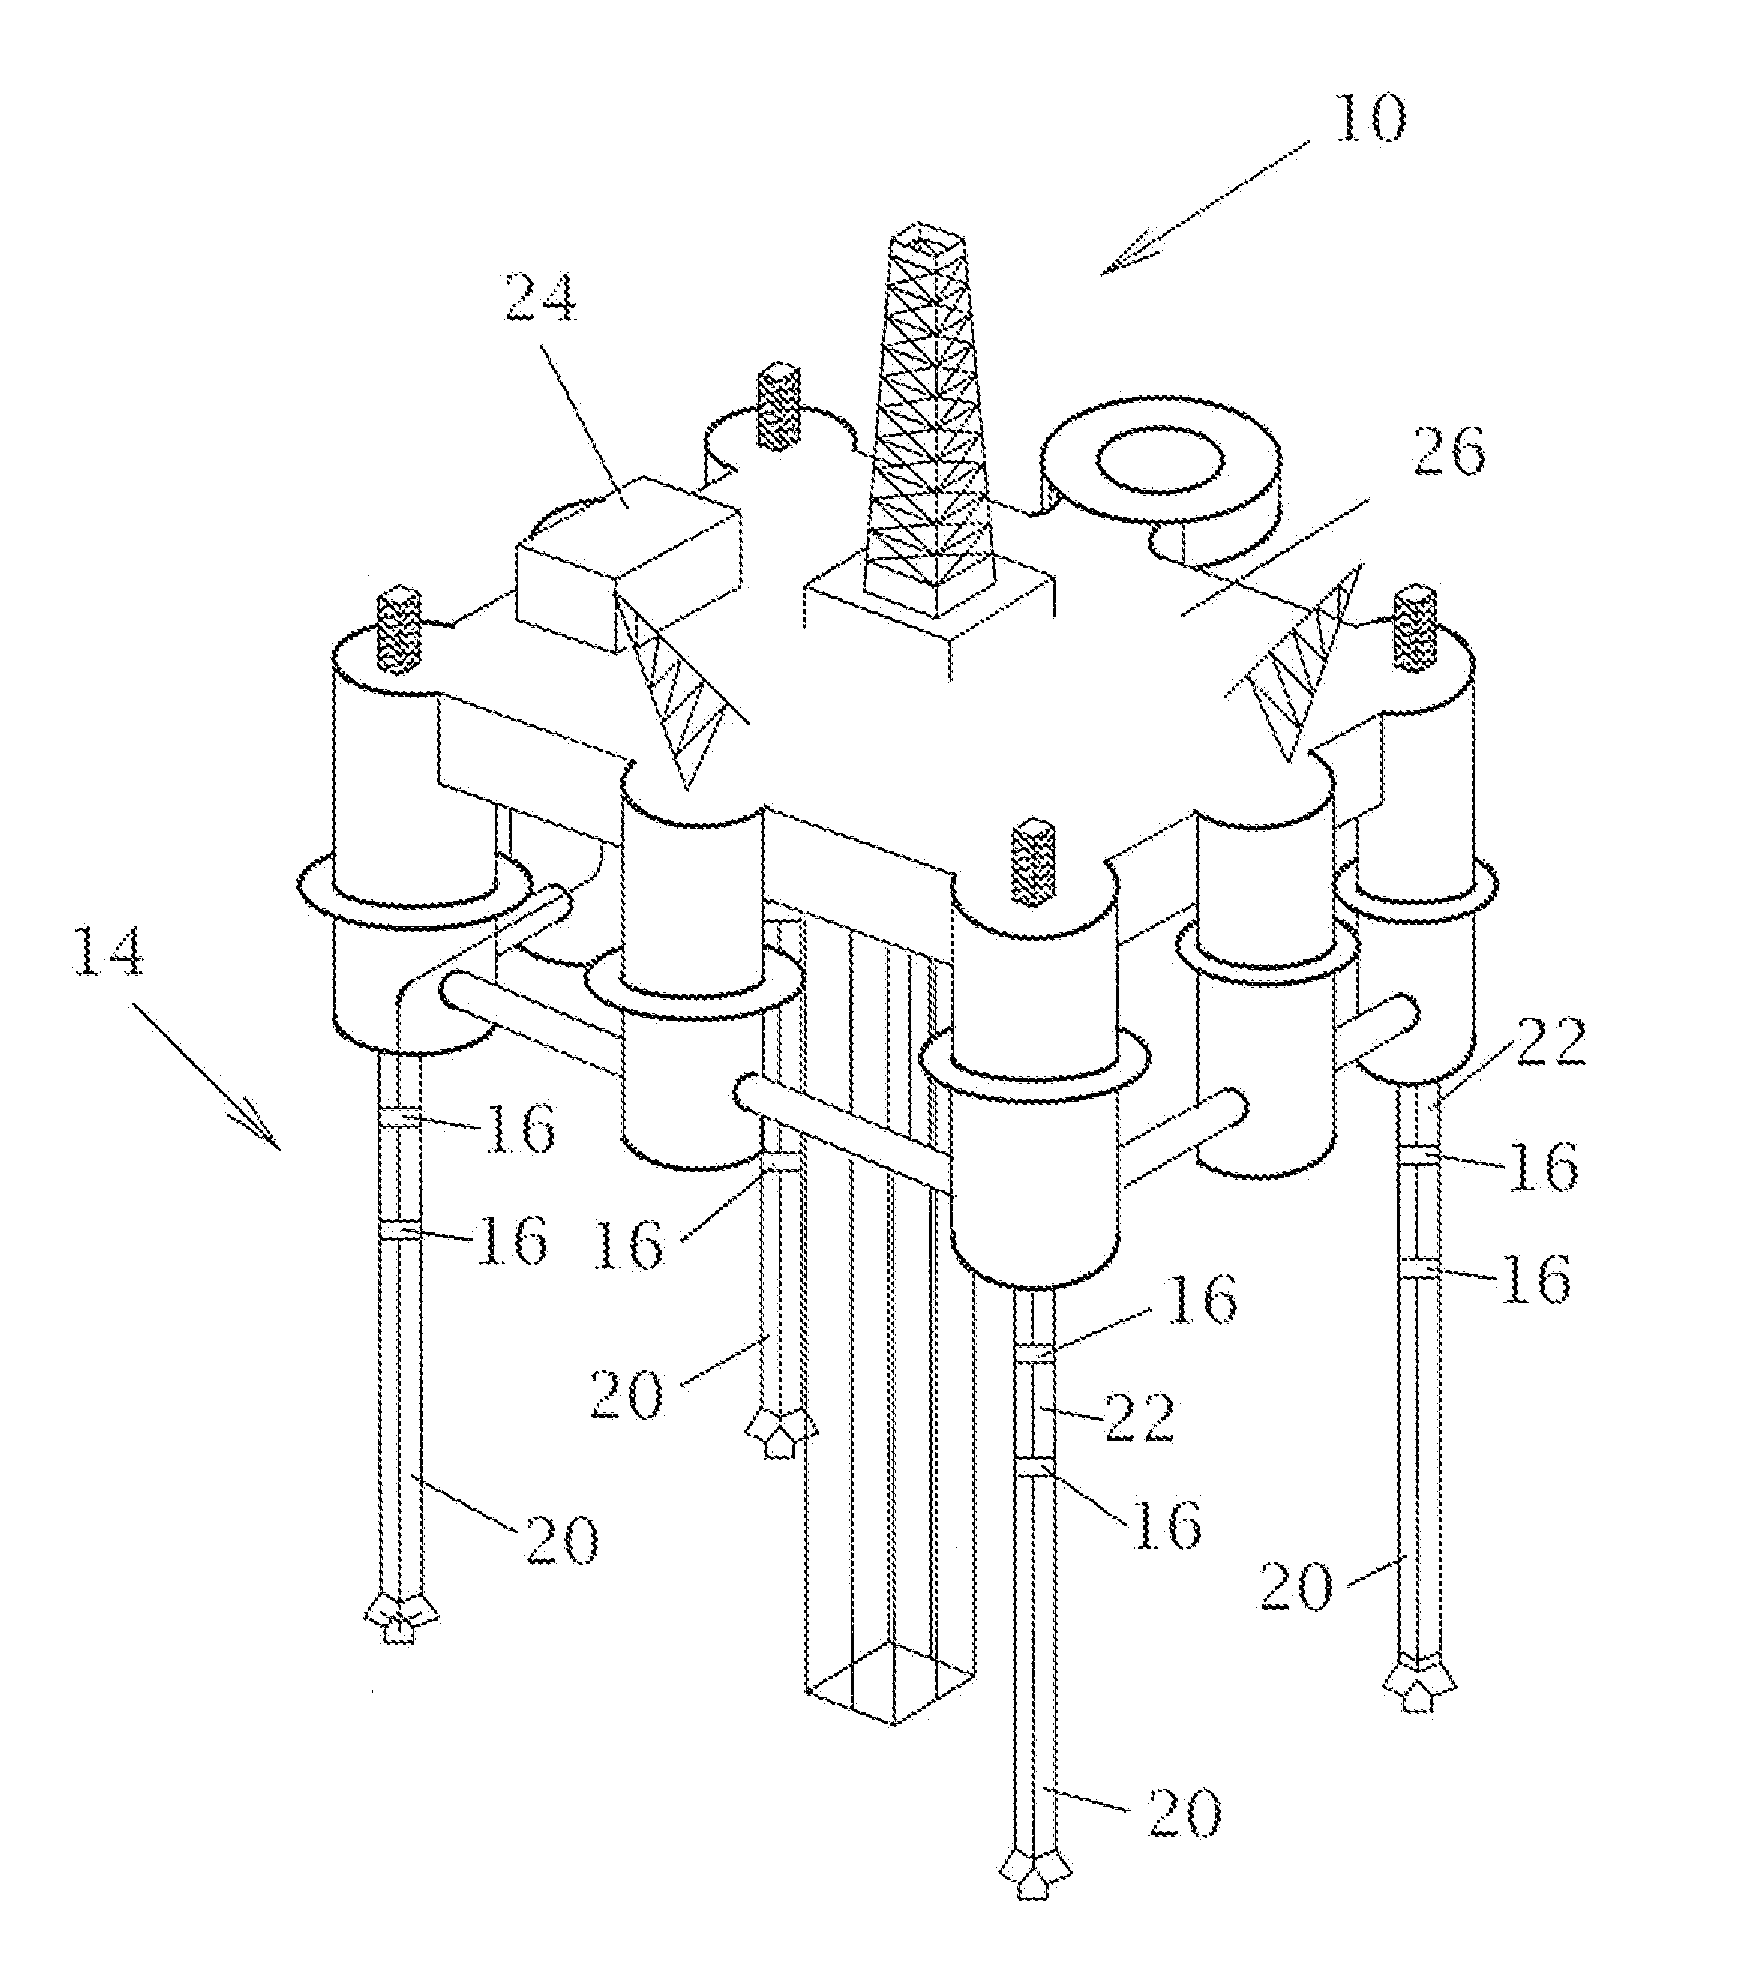 Apparatus and Method for Measuring Mechanical Properties of Tendons in Tension Leg Platforms